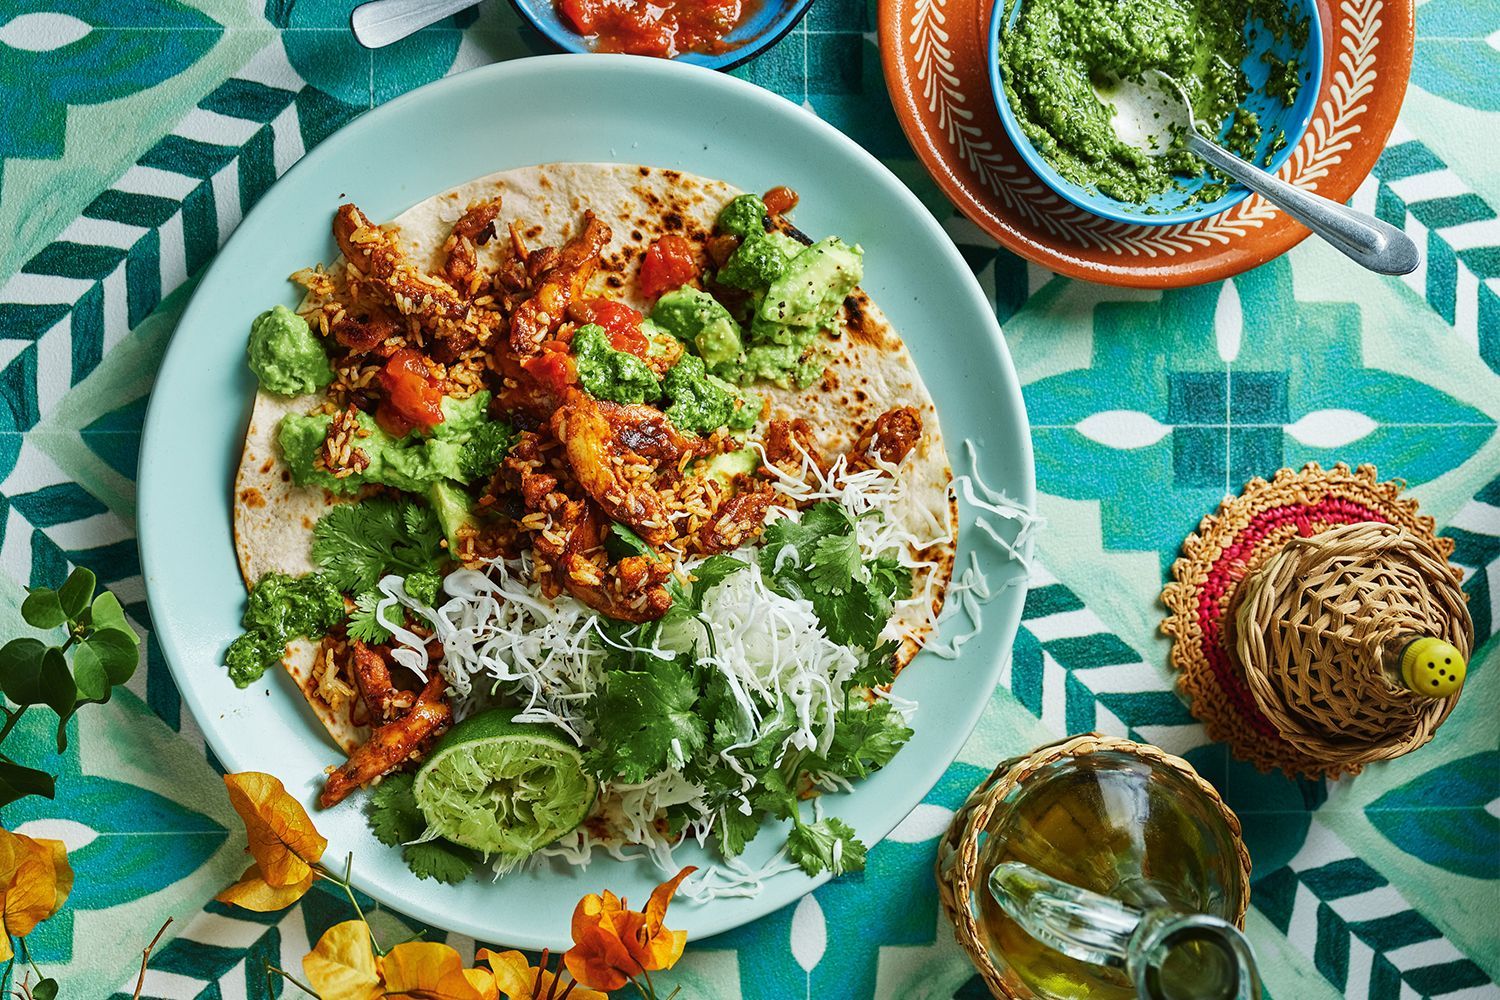 Healthy Mexican Food at Restaurants